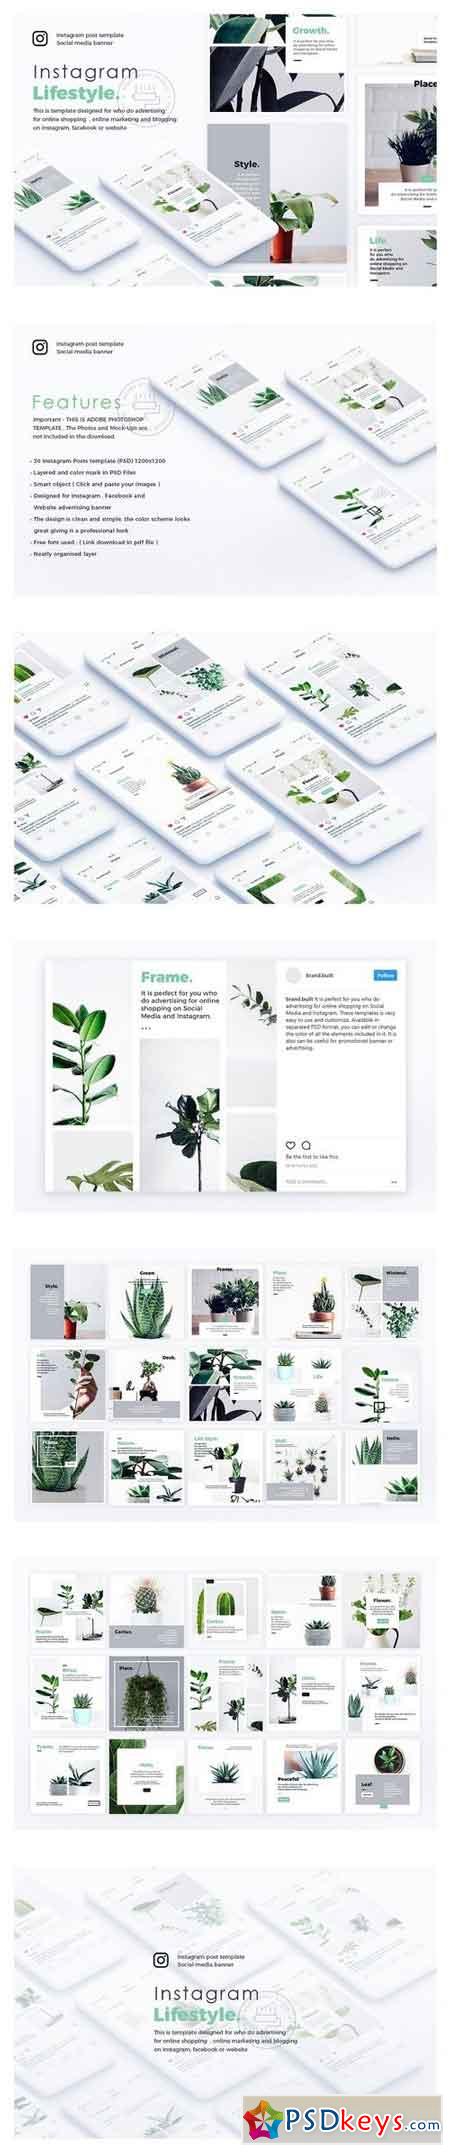 Lifestyle Instagram Posts Template 1999243